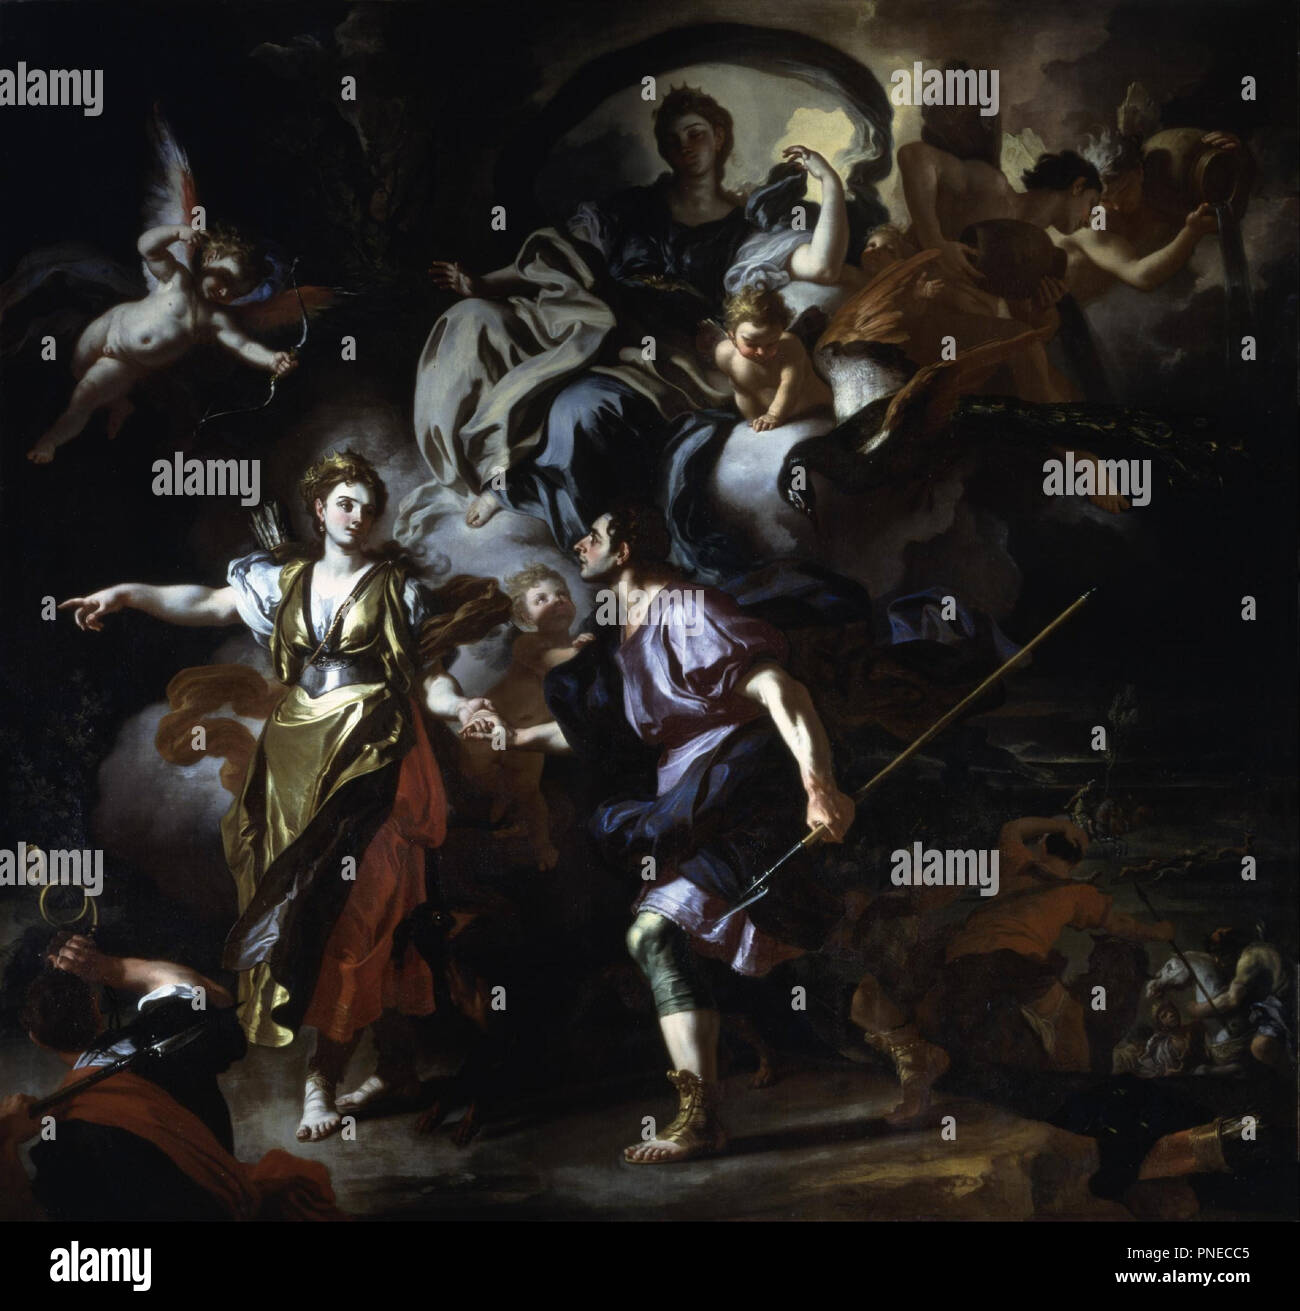 The Royal Hunt of Dido and Aeneas. Date/Period: Ca. 1712 - 1714. Painting. Oil on canvas Oil on canvas. Height: 303 mm (11.92 in); Width: 321 mm (12.63 in). Author: Francesco Solimena. Stock Photo